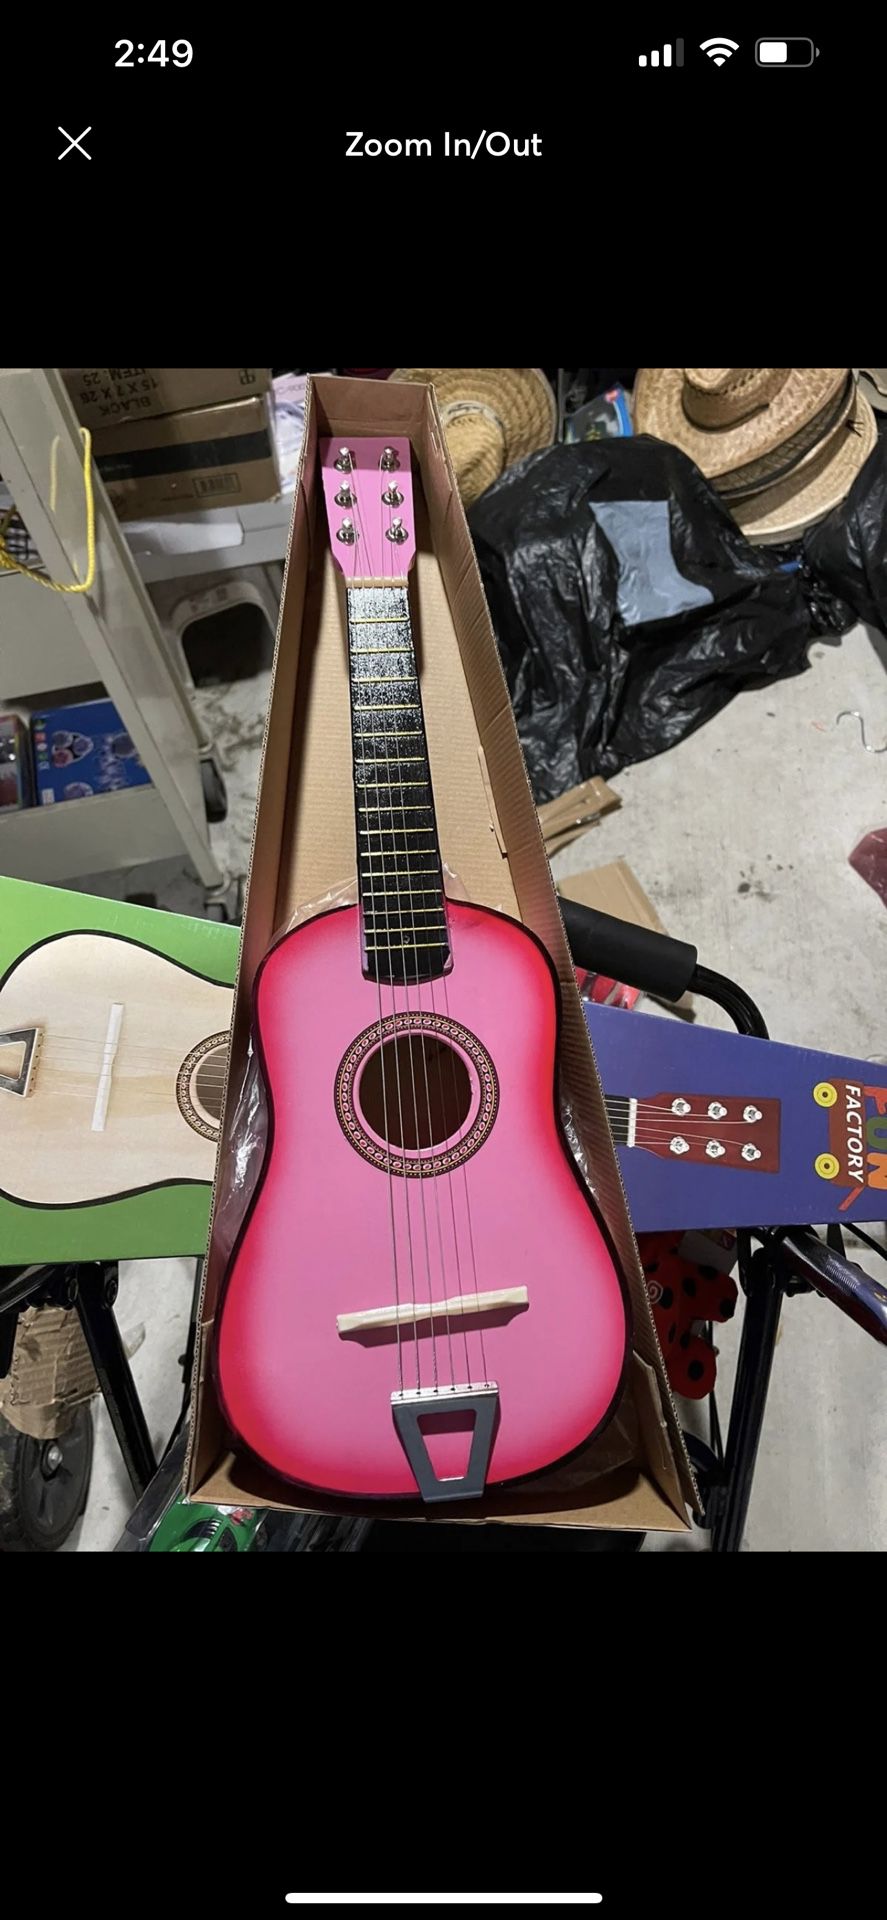 17 Dollars Each New Kids Guitar Toy Like 22 Inches Tall 